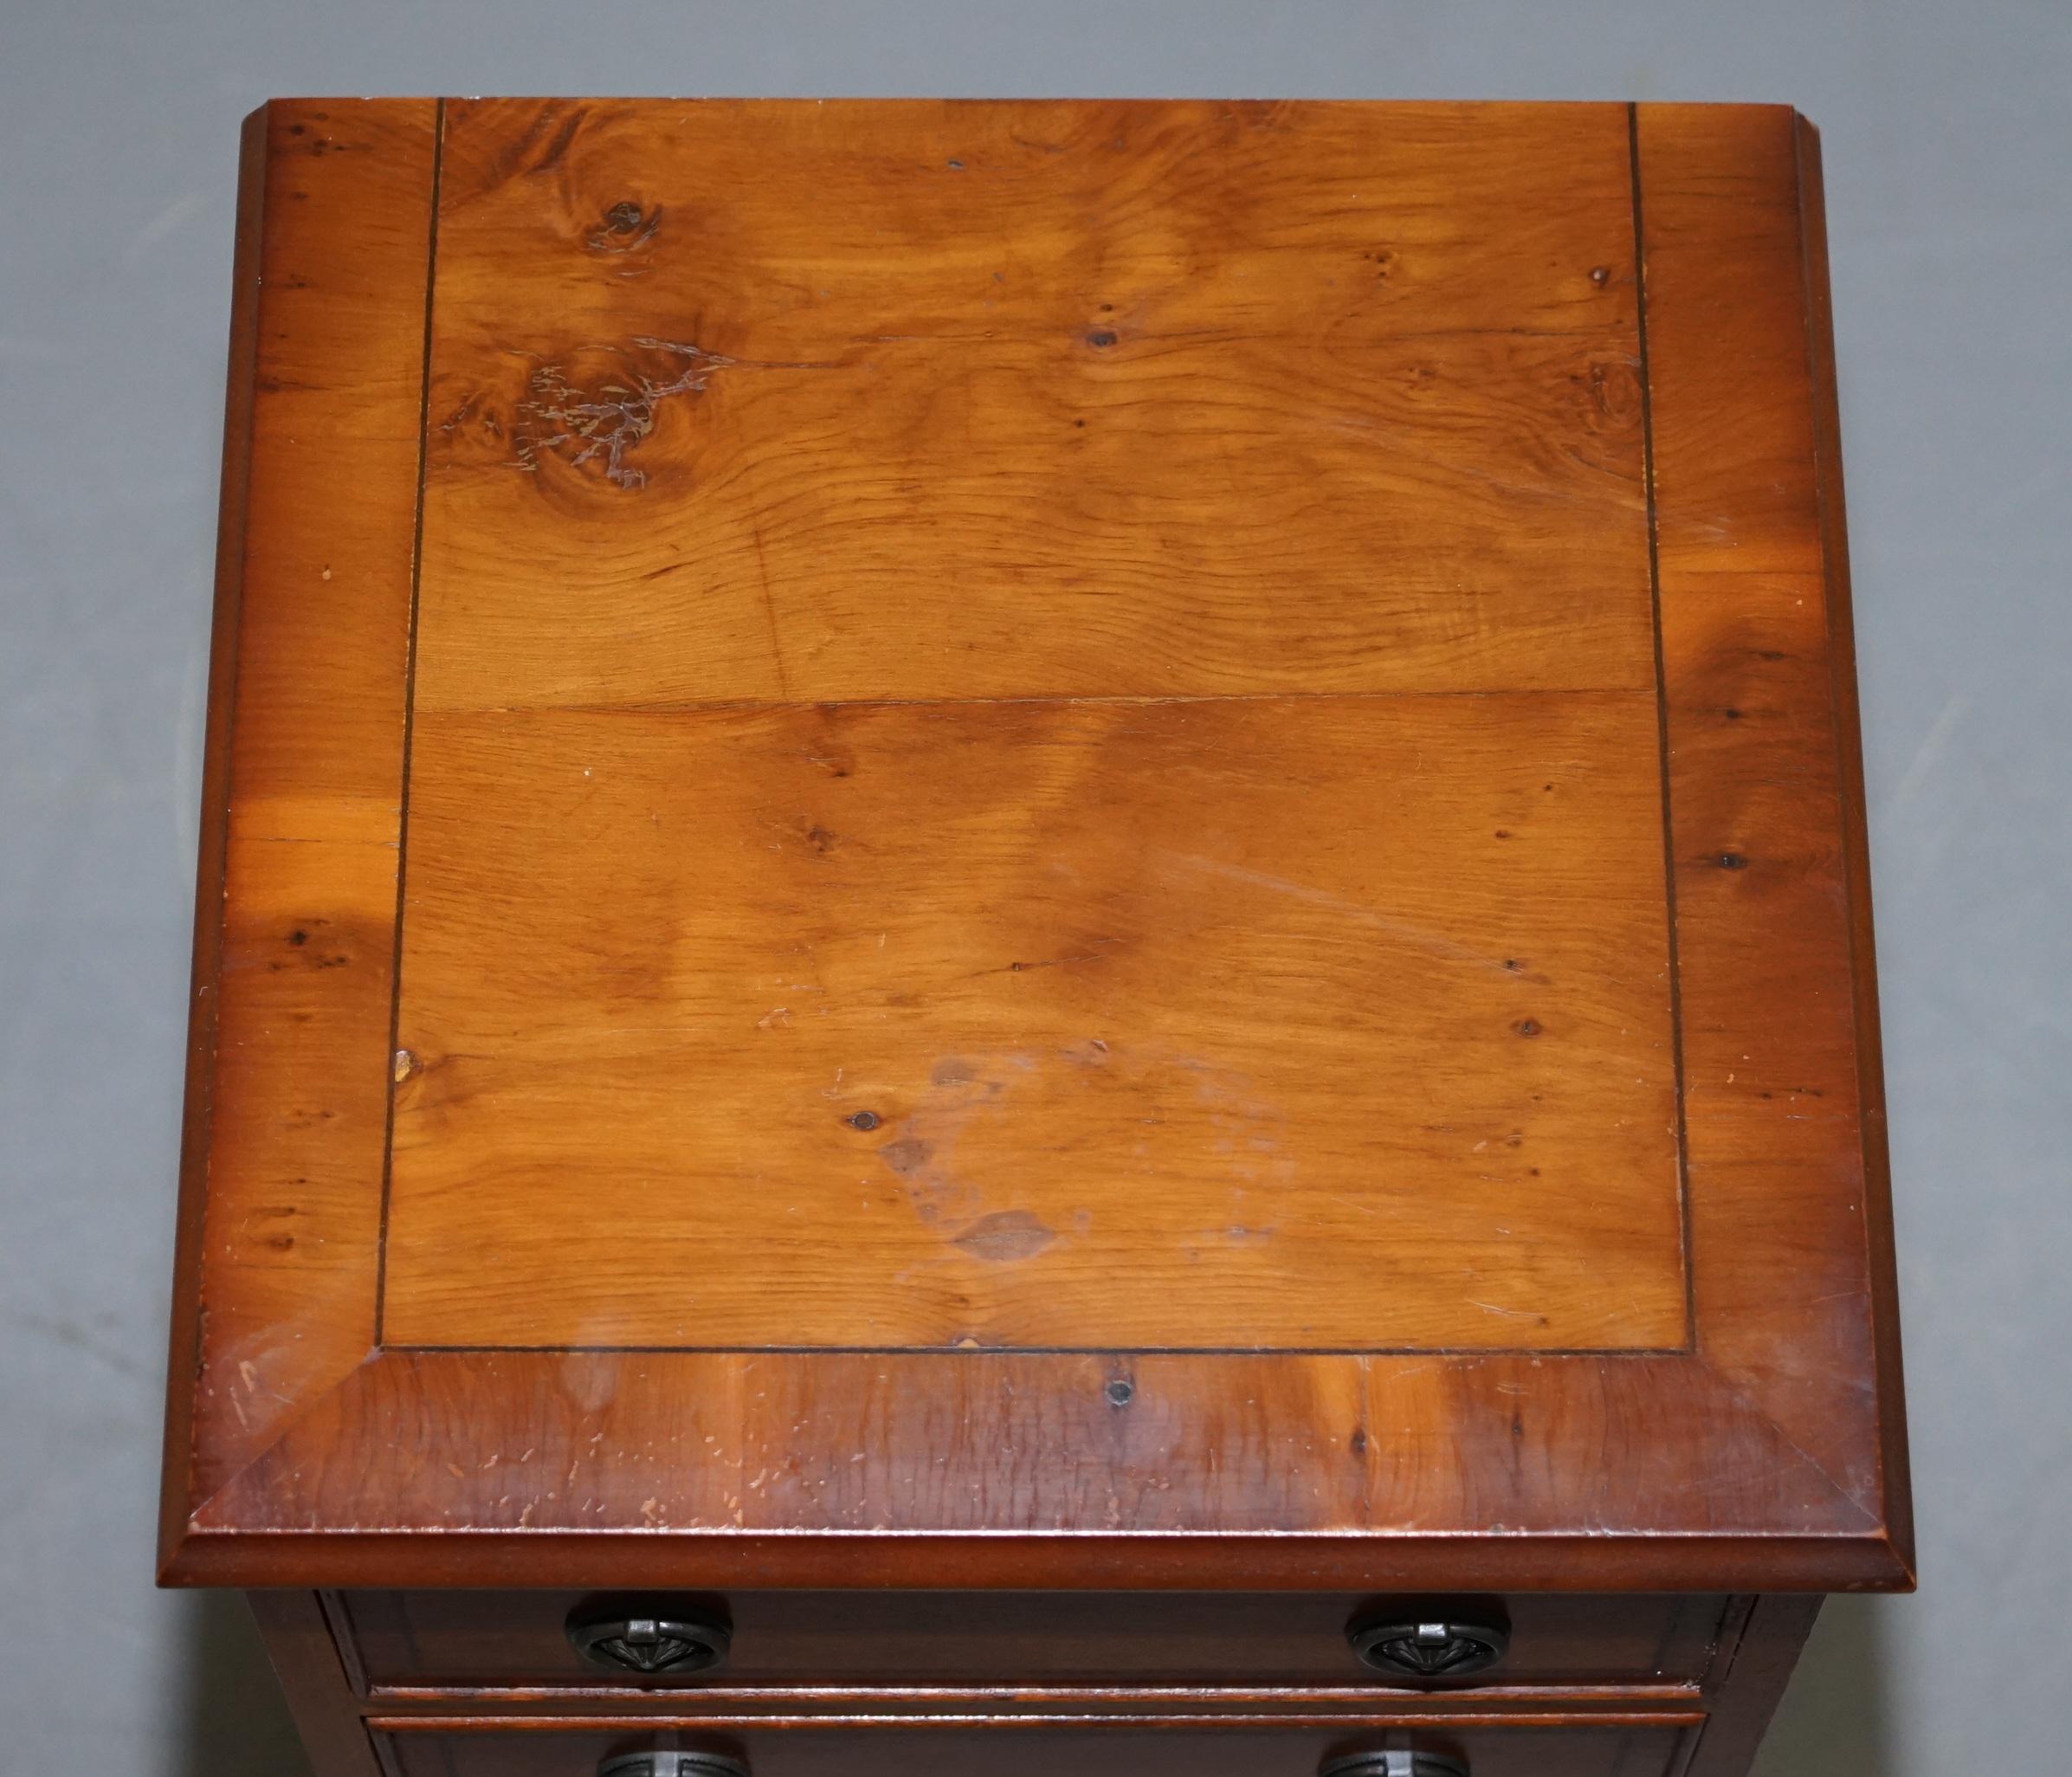 English Lovely Burr Yew Wood Side Table Sized Chest of Drawers Georgian Style Very Fine